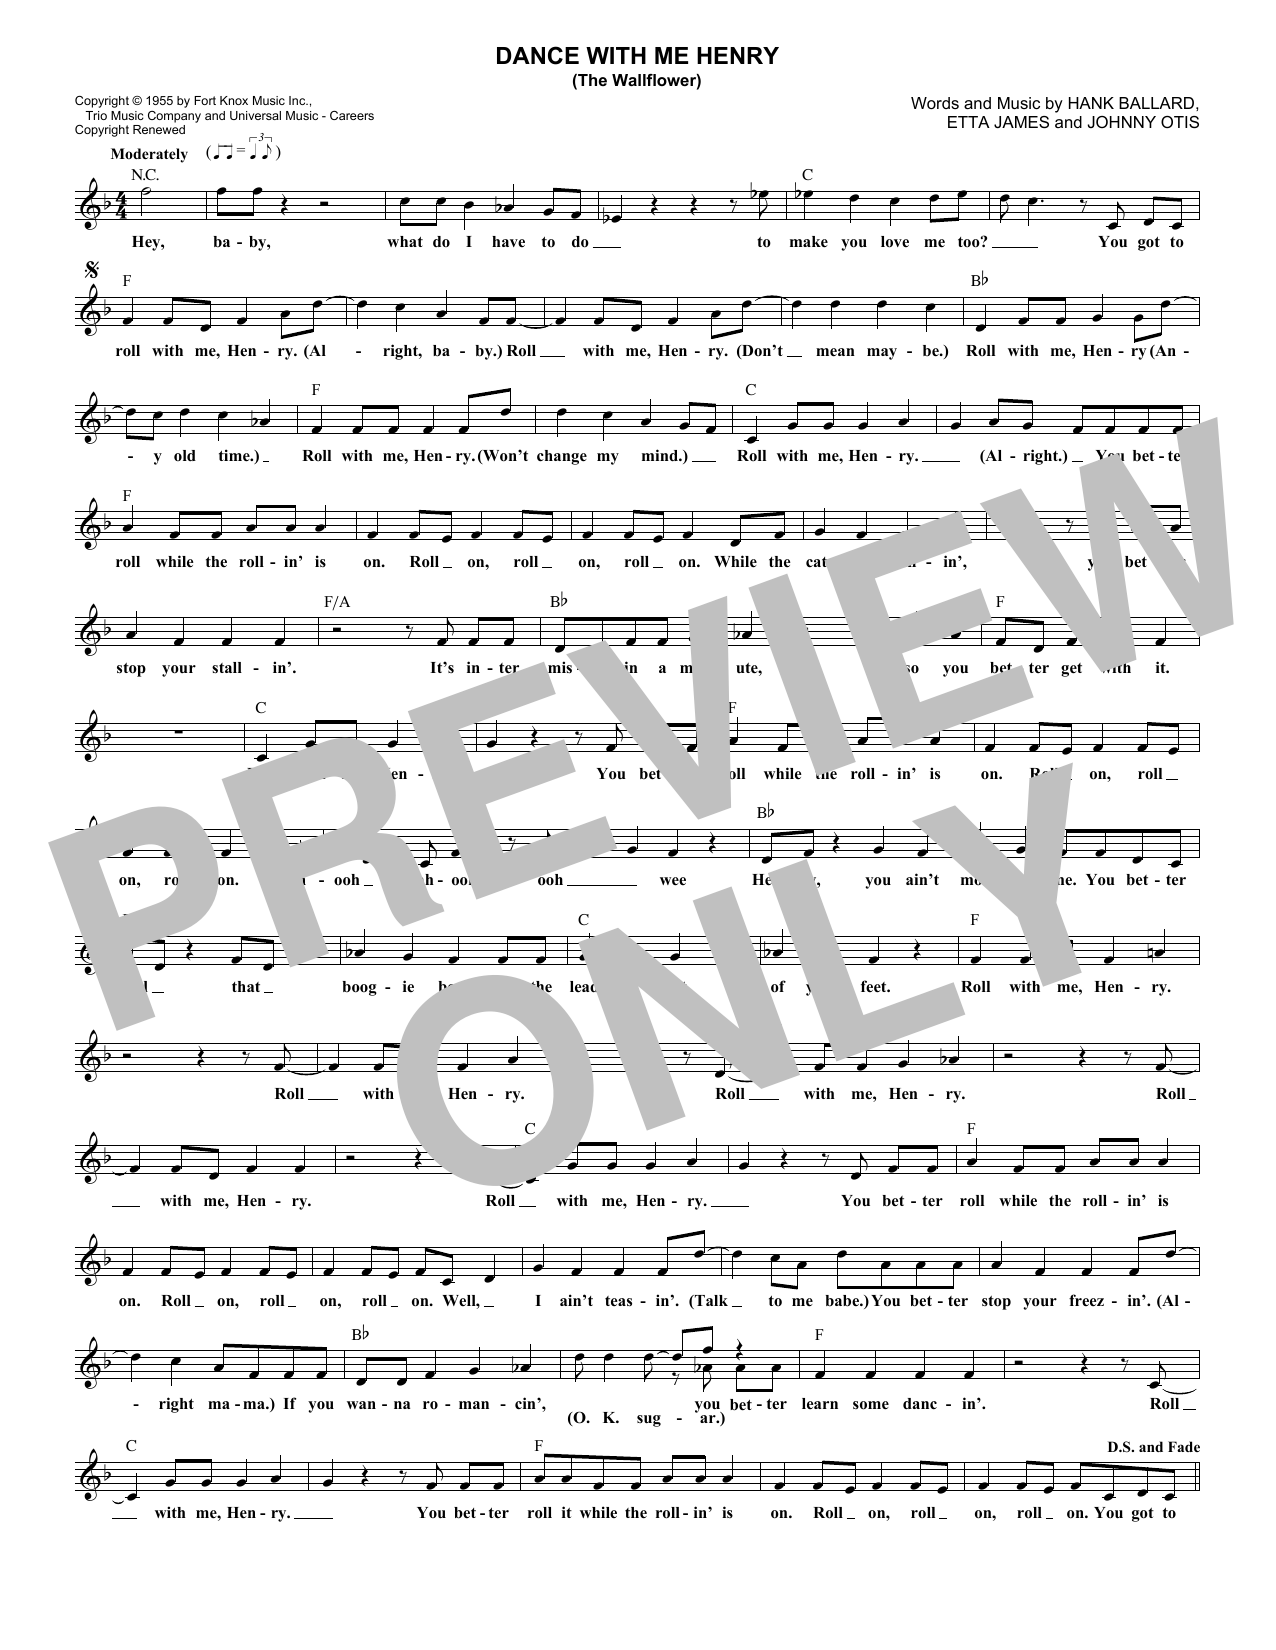 Download Etta James Dance With Me Henry (The Wallflower) Sheet Music